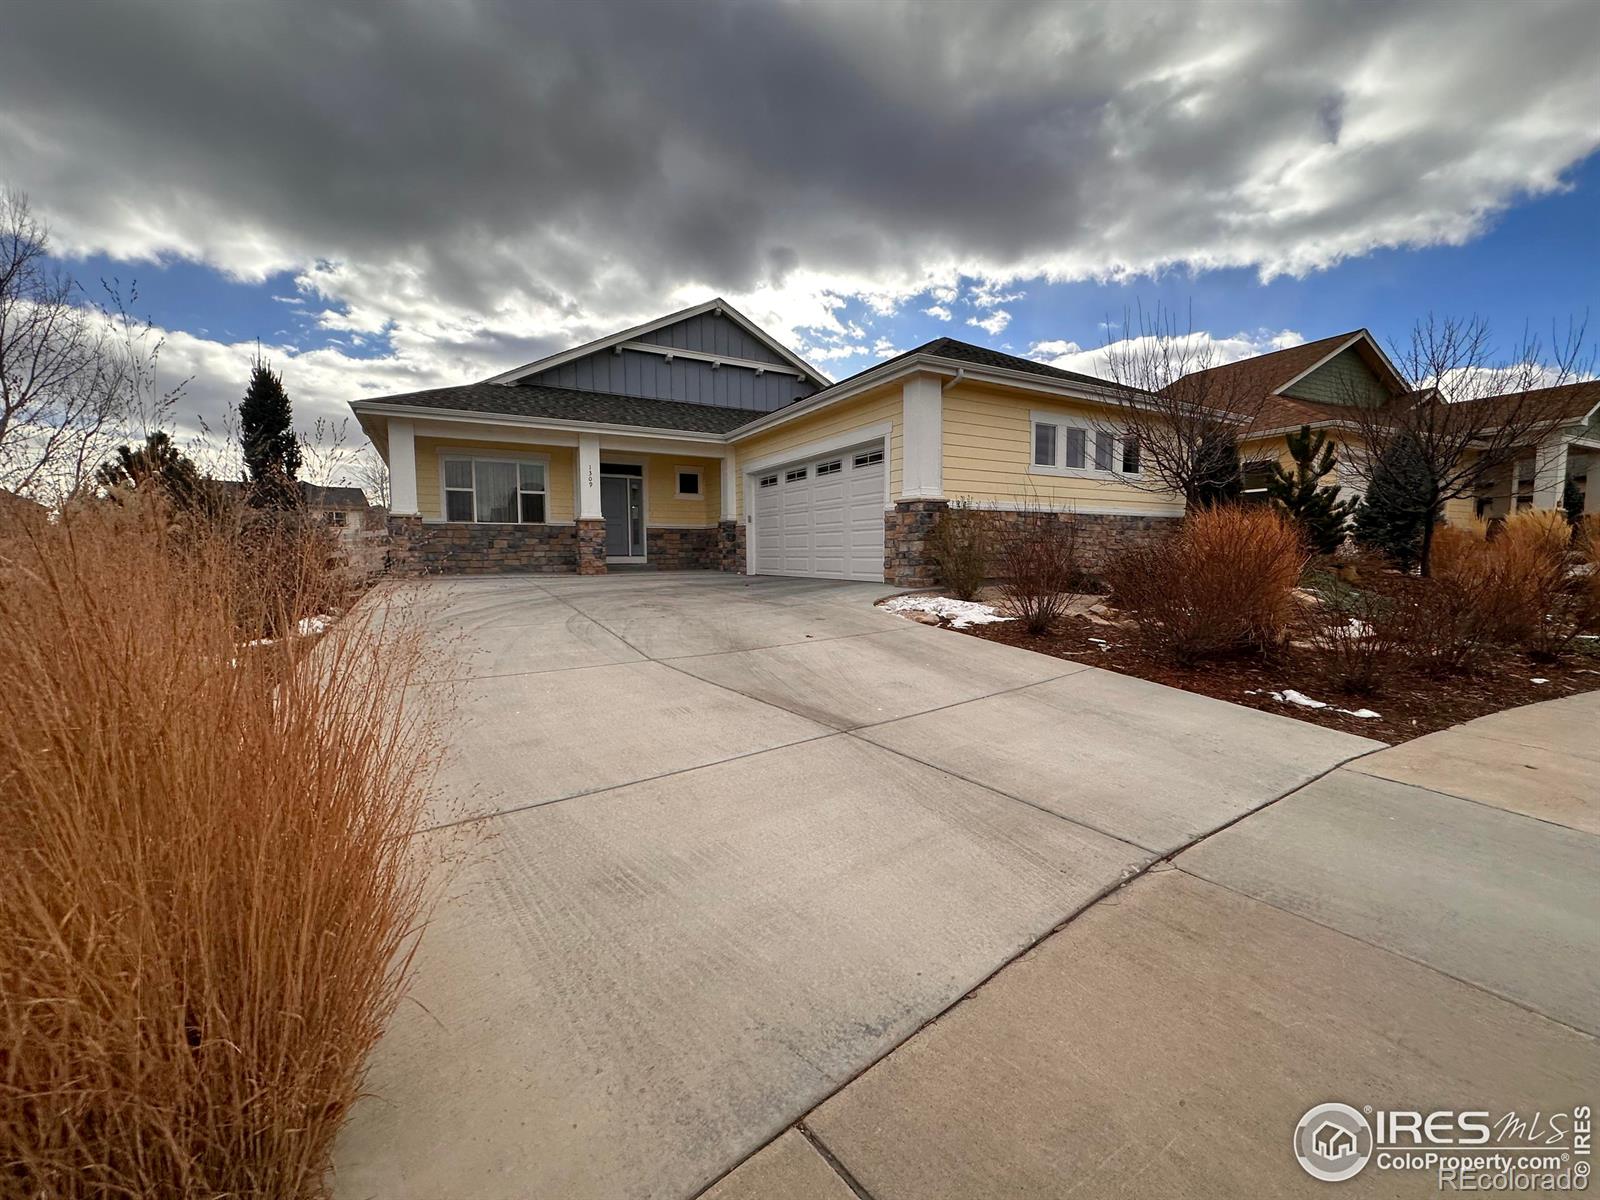 1309  Leahy Drive, fort collins MLS: 4567891000976 Beds: 5 Baths: 3 Price: $775,000